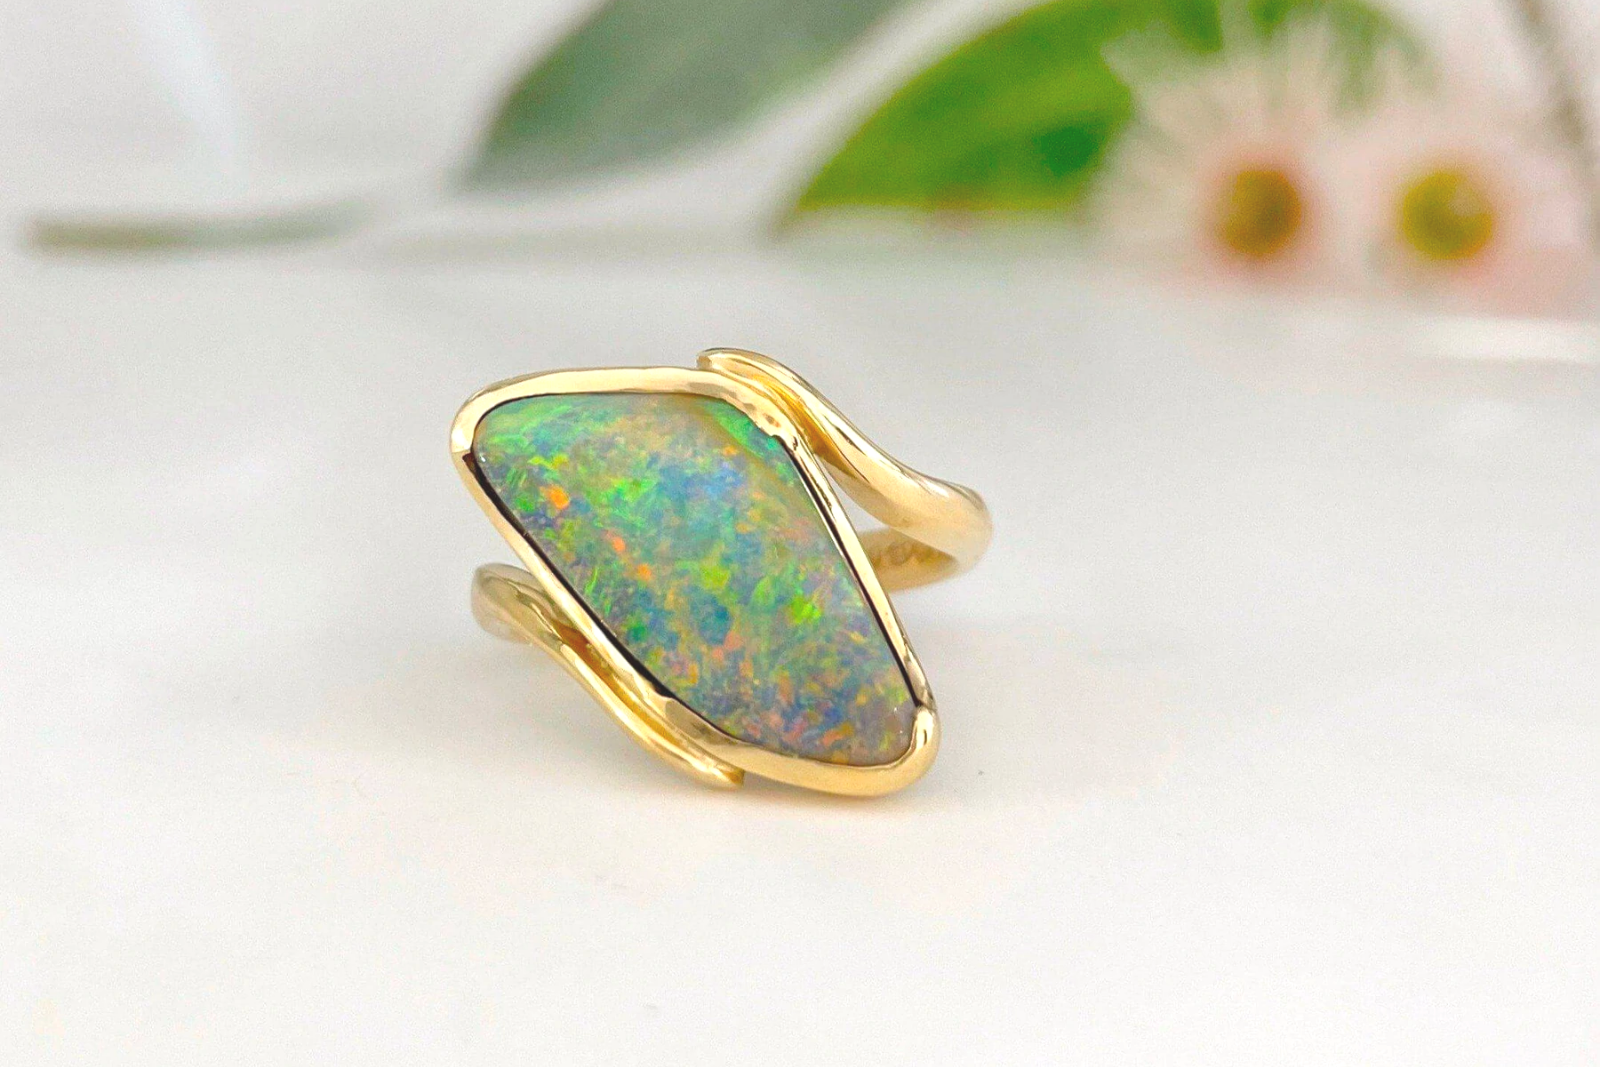 Why are Australian Opals so Expensive?